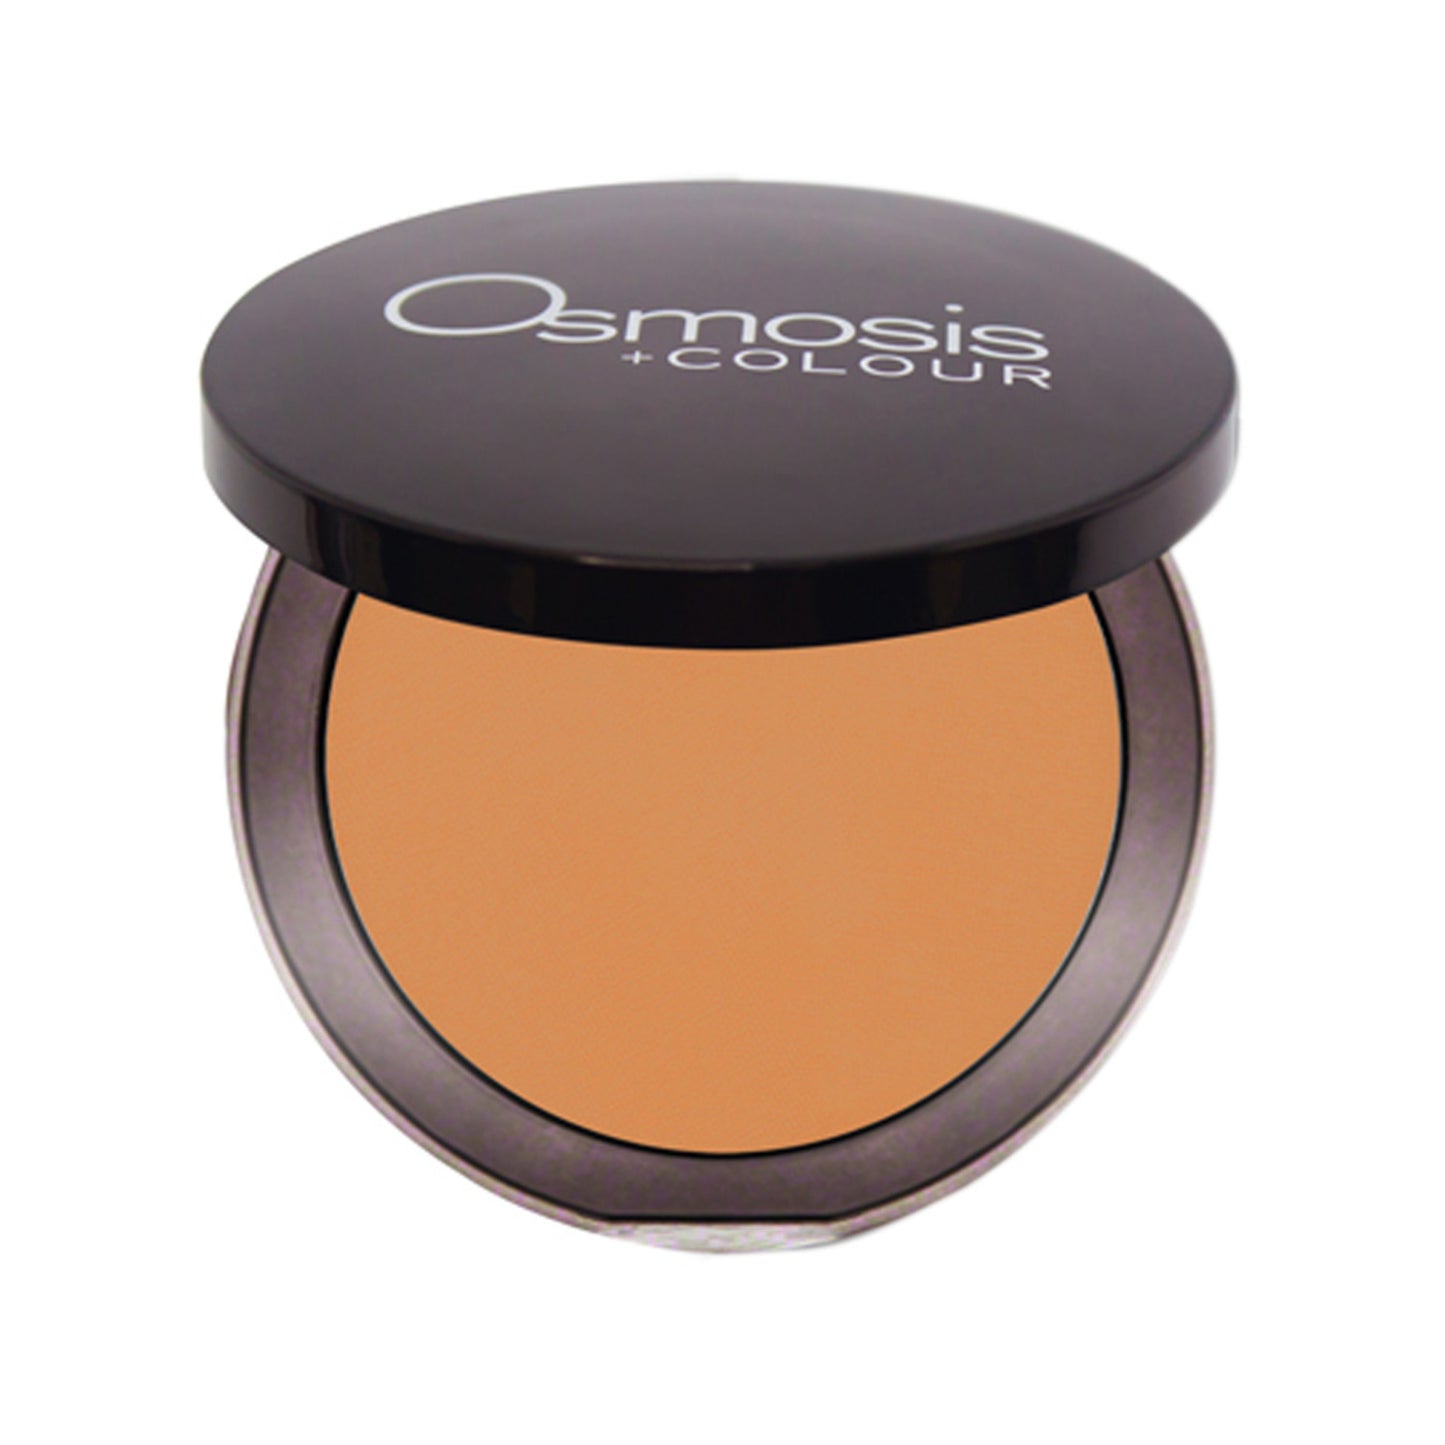 Osmosis Professional Mineral Pressed Base 9.6 g / 0.3 oz